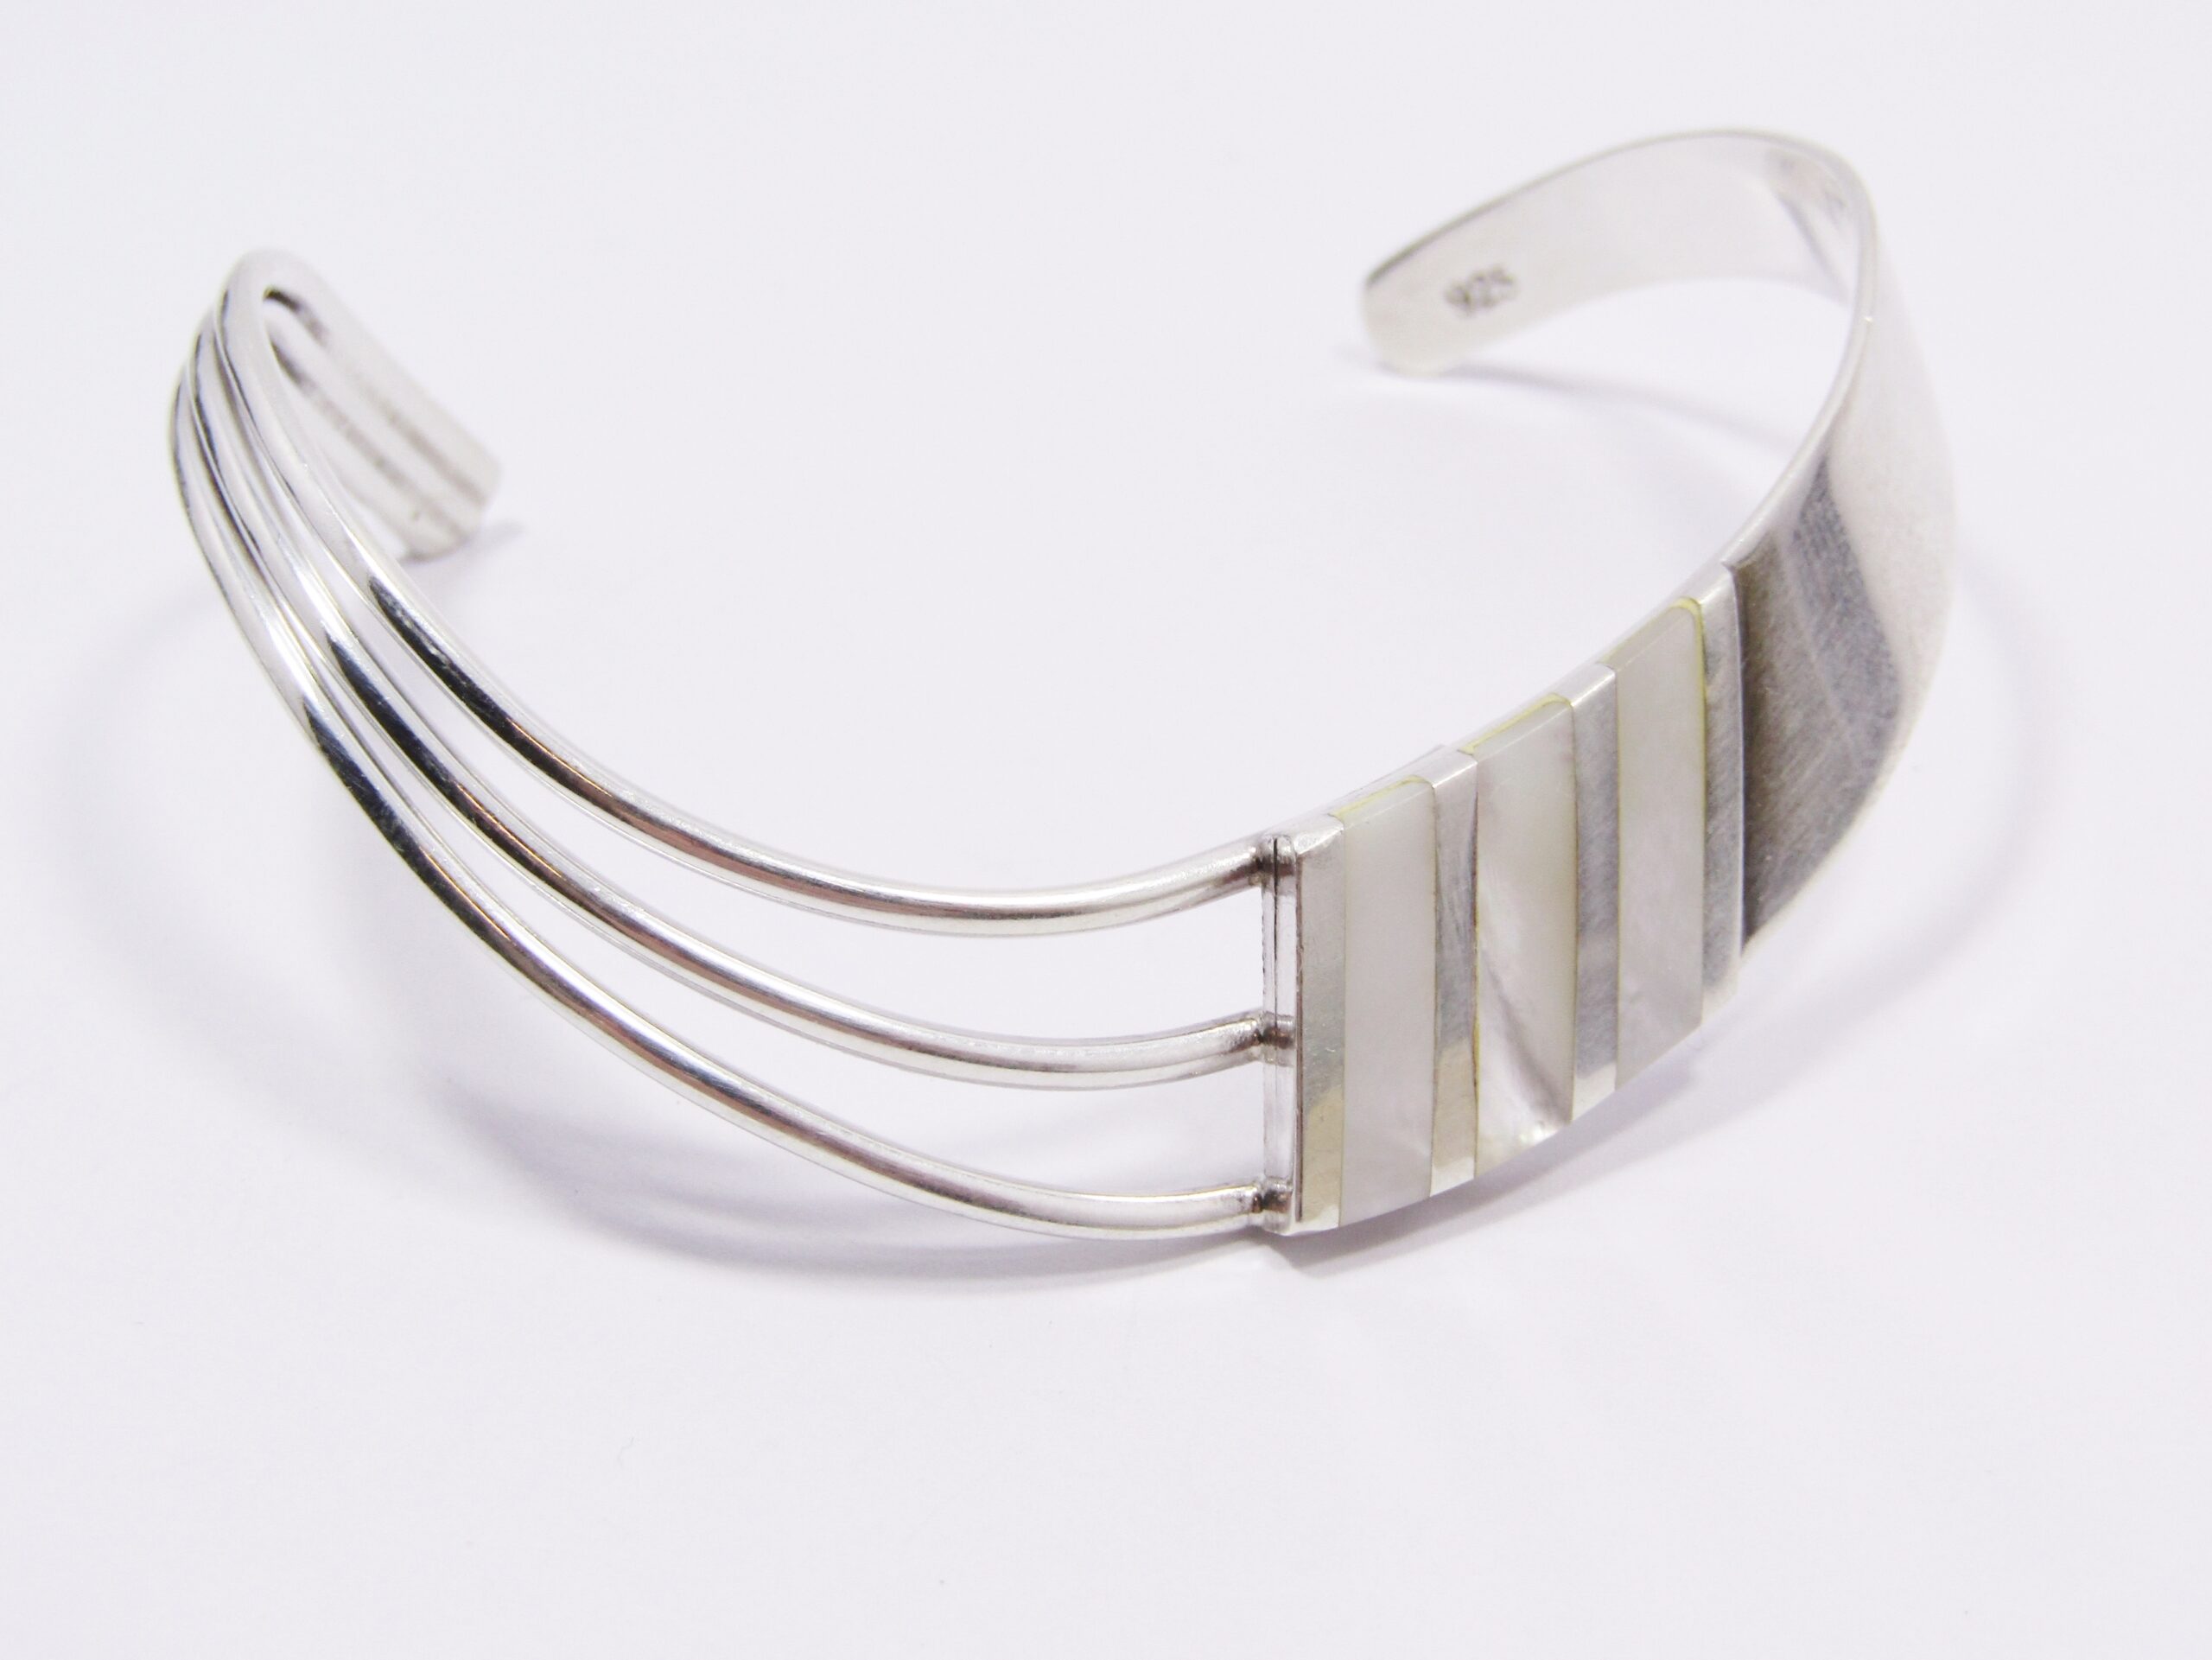 A Stunning Fancy Design Cuff Bangle With a Mother of Pearl Inlay in Sterling Silver.